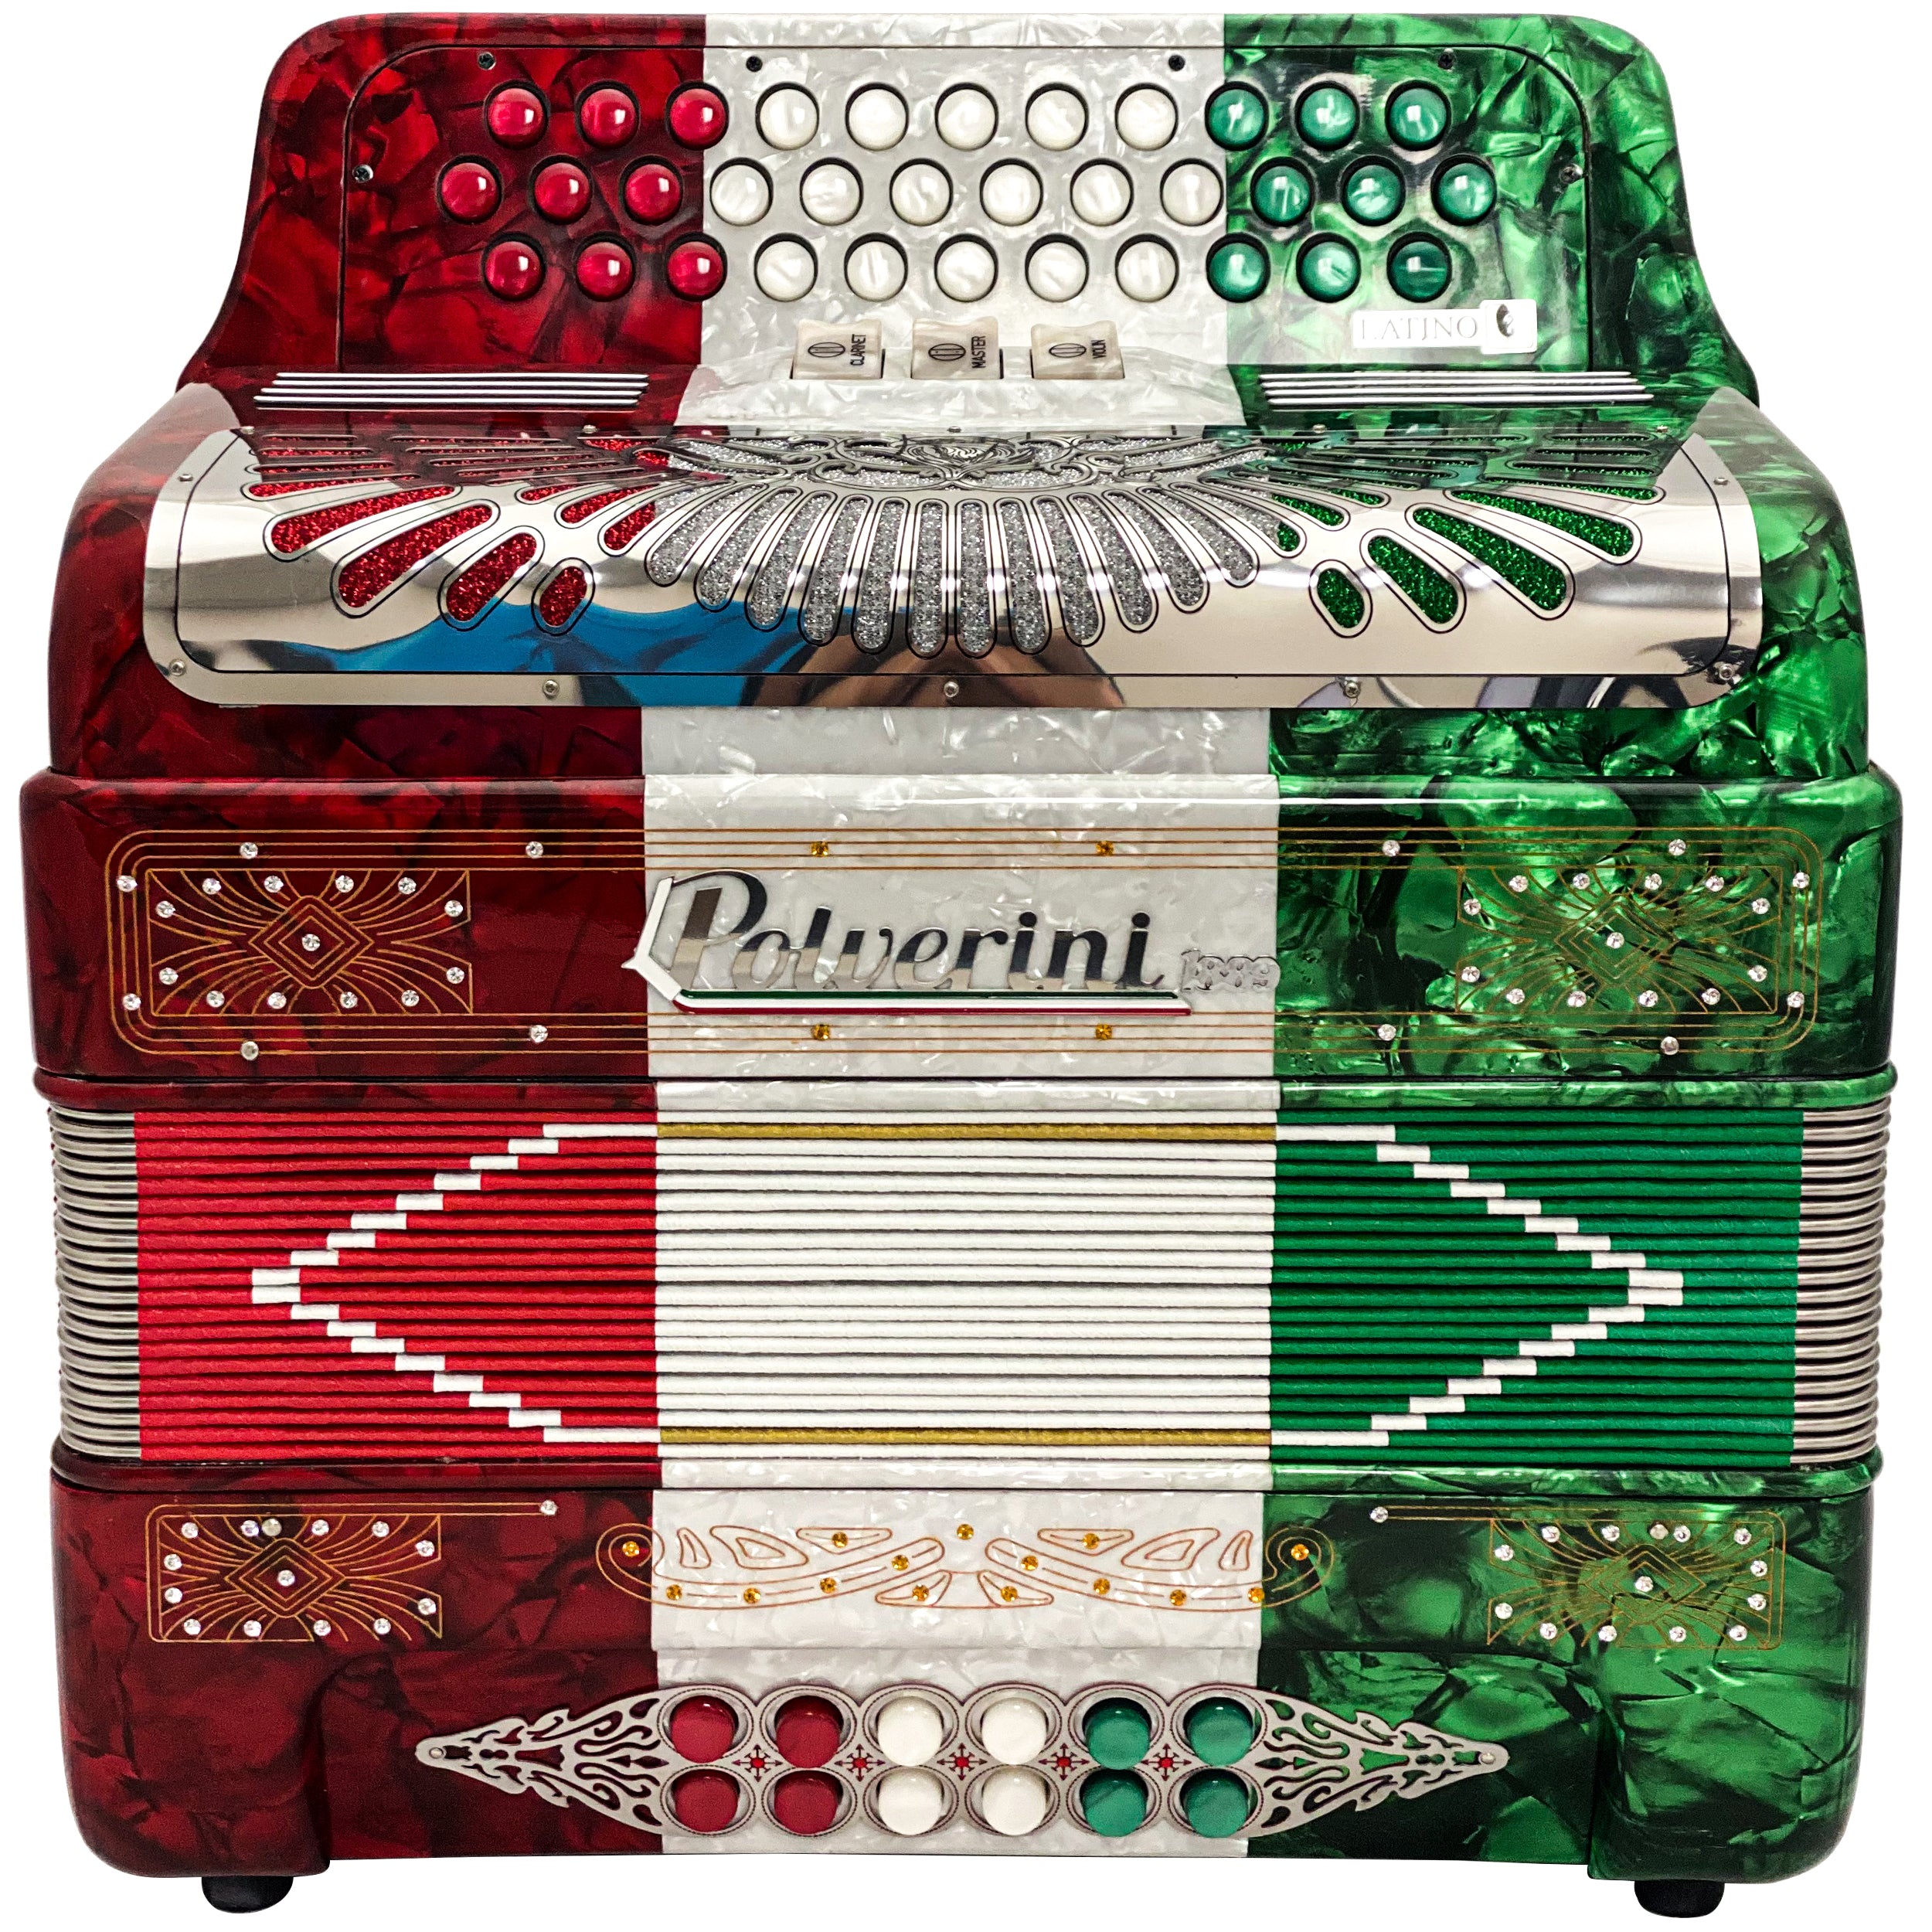 Polverini 34 Button 12 Bass 3 Switches Button Accordion FBE Red, White and Green